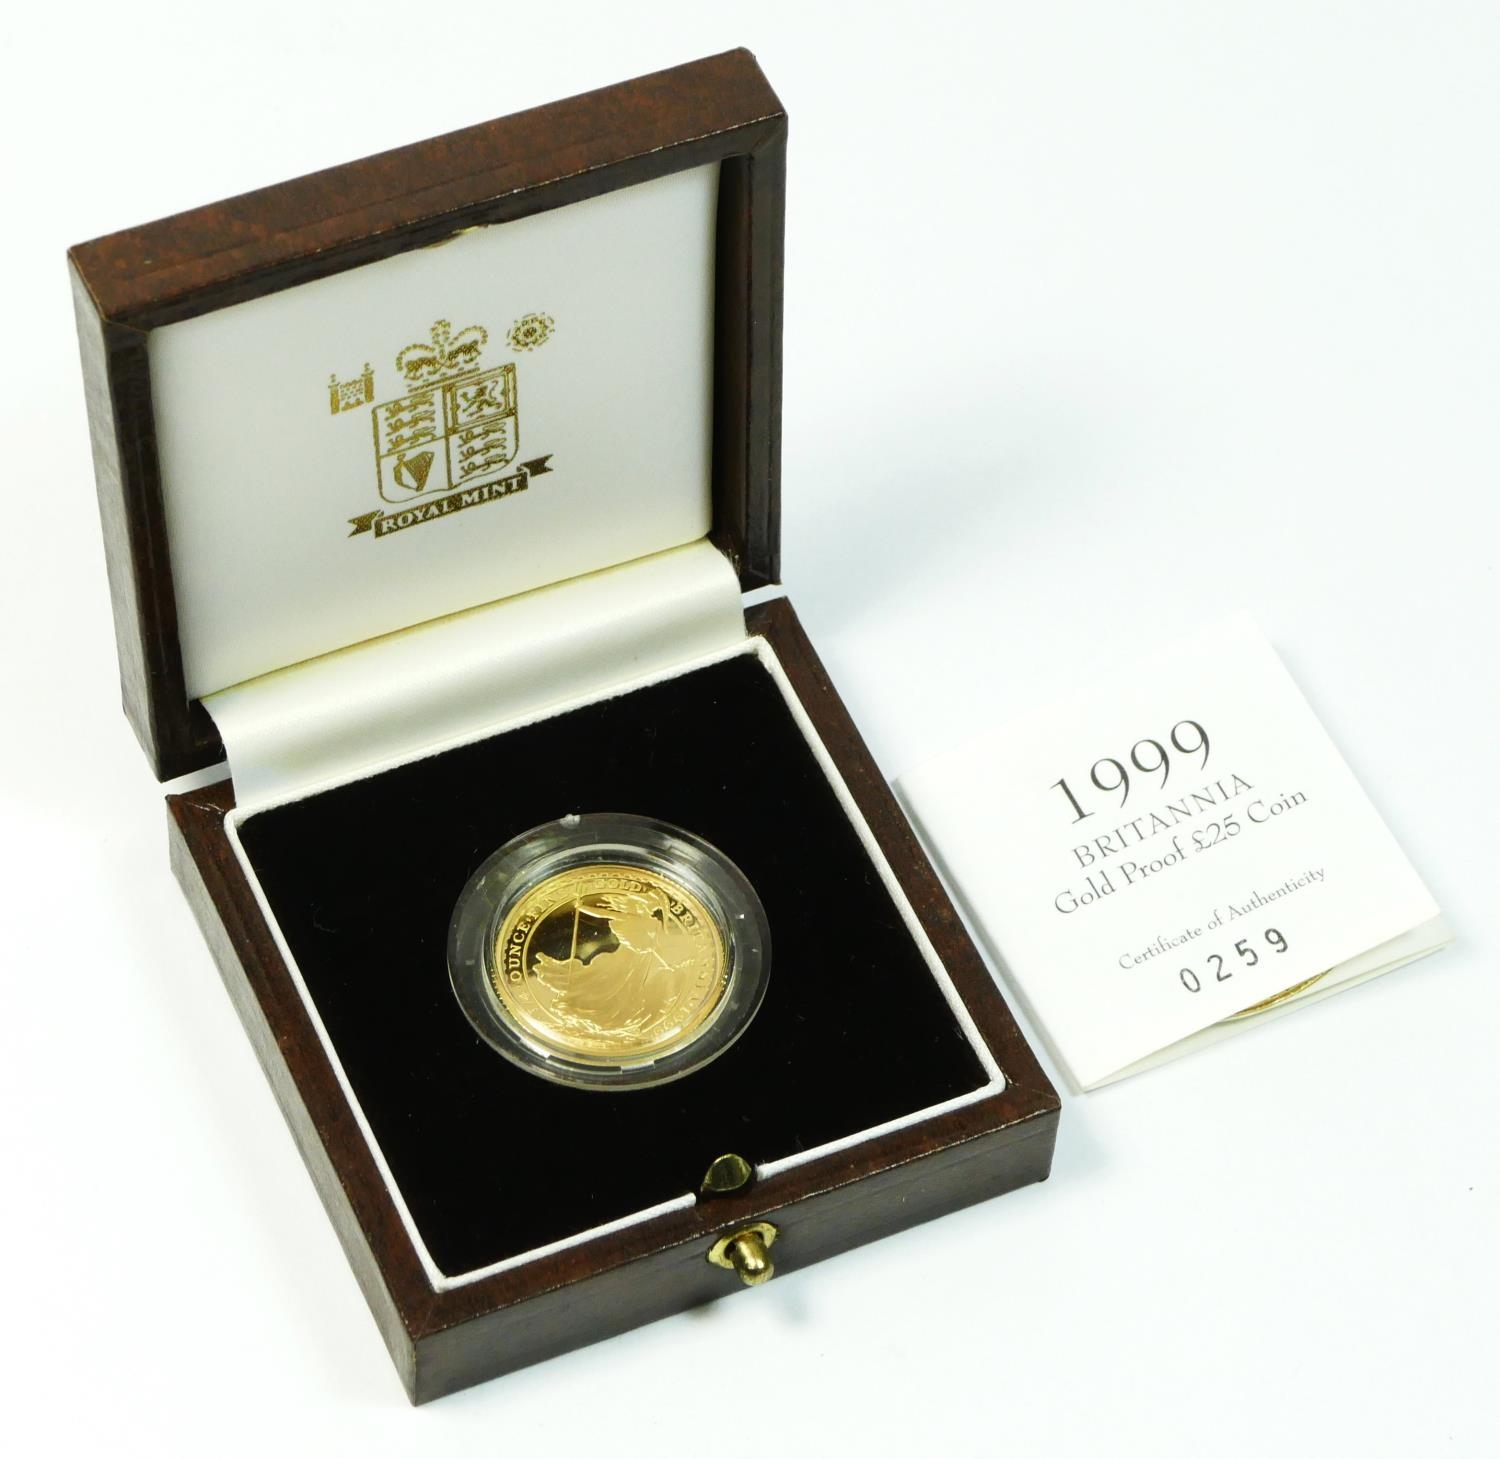 Royal Mint 1999 gold proof 1/4 ounce £25 Britannia coin, case, certificate